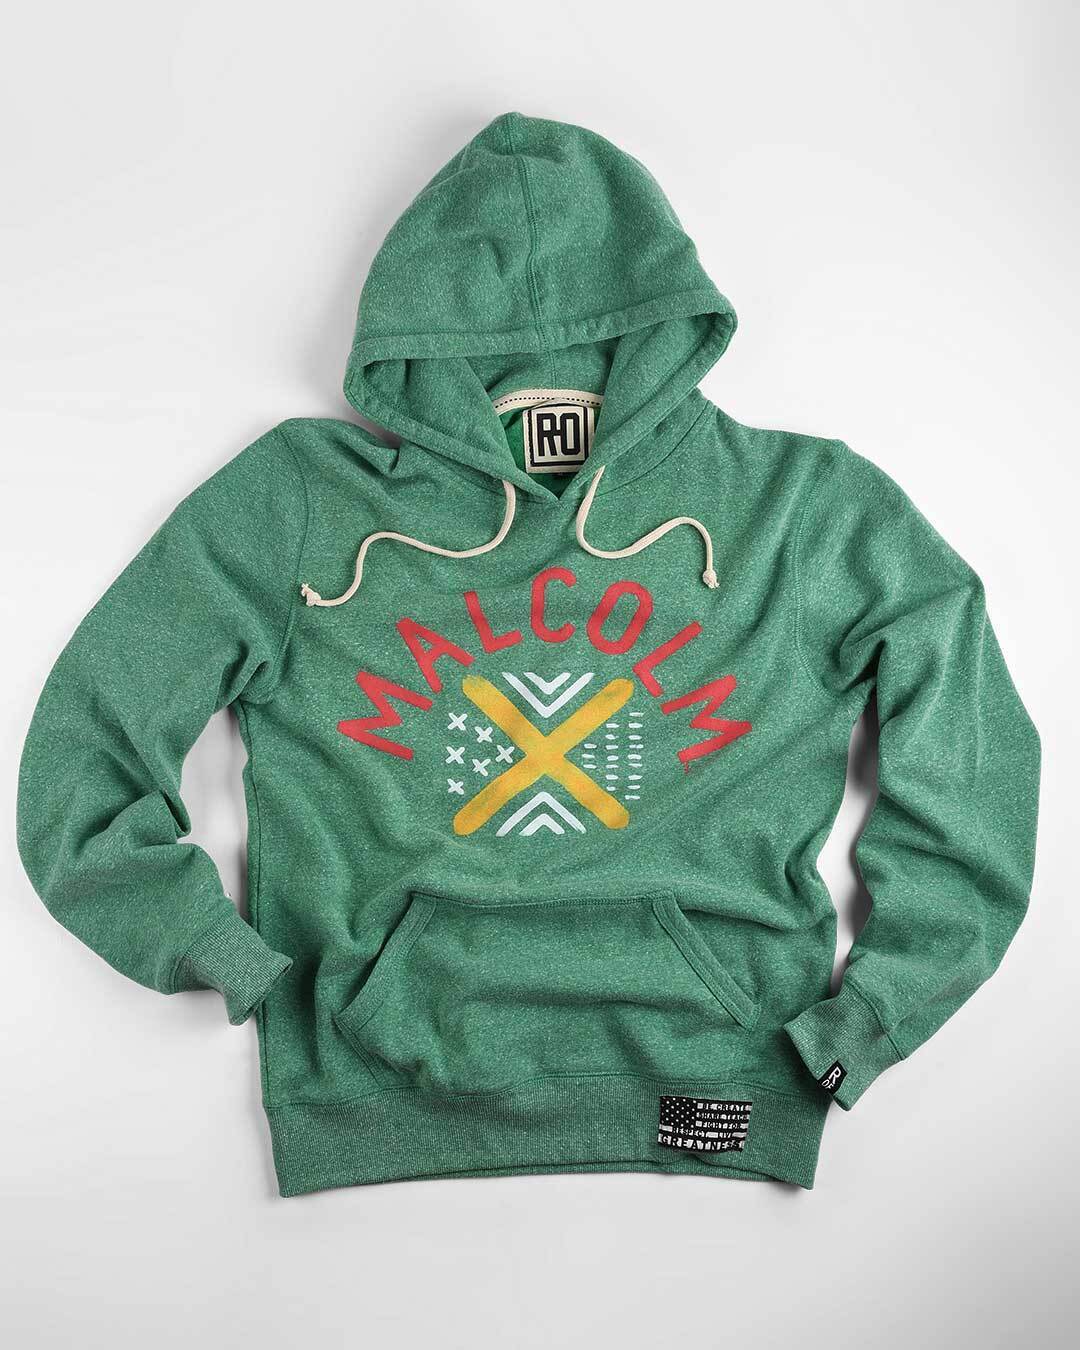 BHT - Malcolm X Green PO Hoody - Roots of Fight